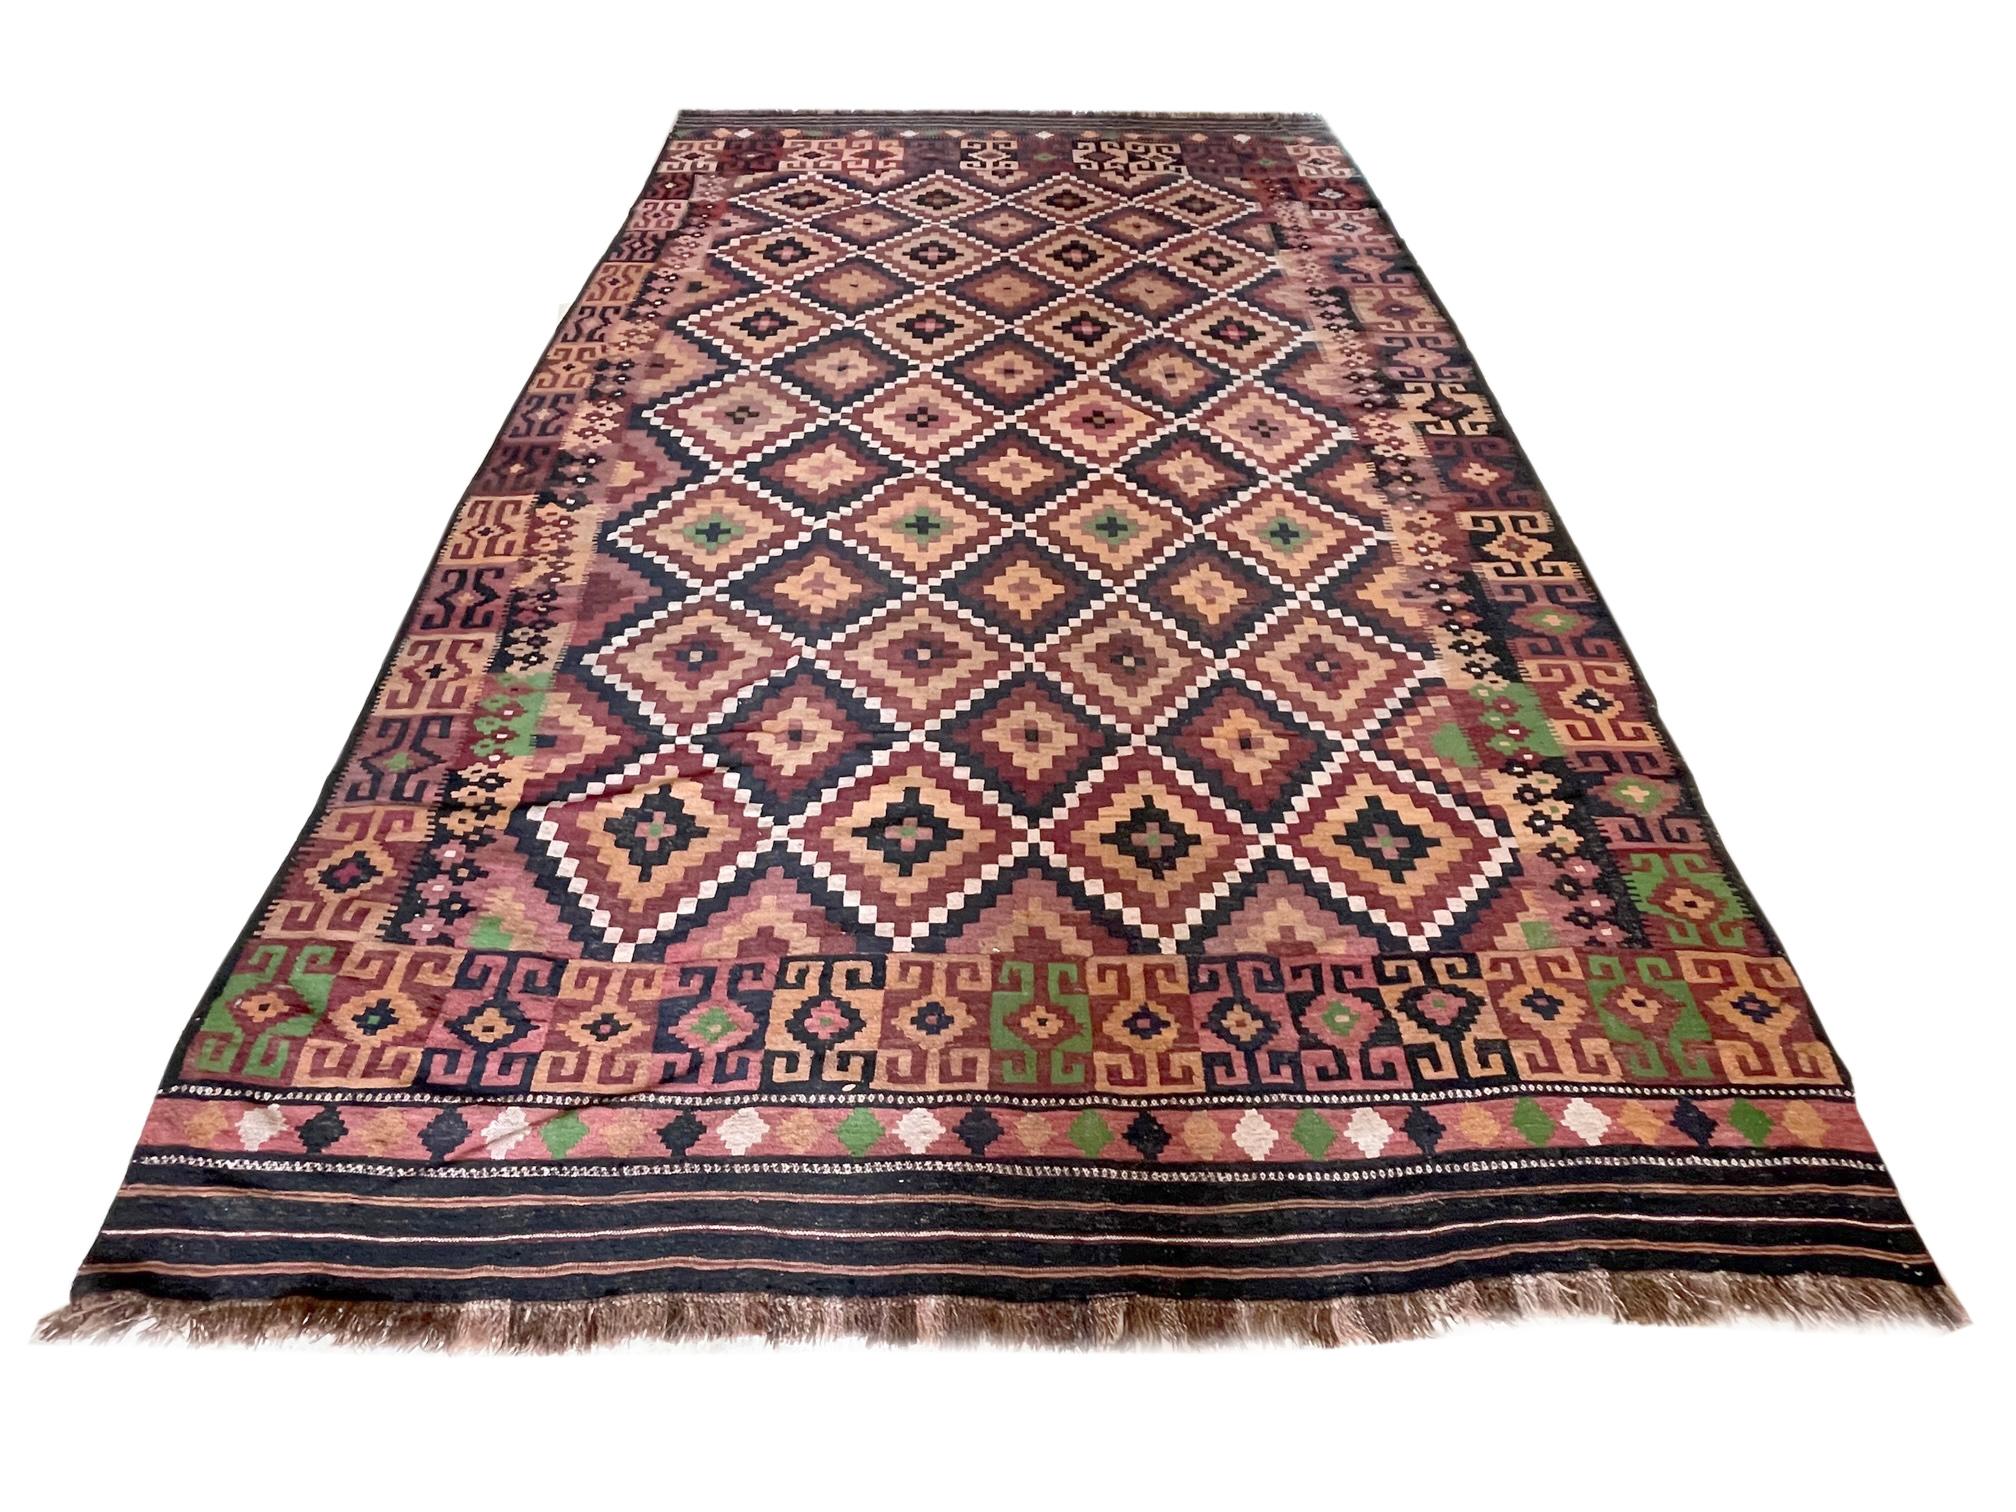 This rug is an Afghan Rug which is a workshop carpet woven by a weaving house in Afghanistan. Afghanistan has a rich history in the Craft of rug-making. The design in this piece is tribal allover diamond design. The color combination in this piece